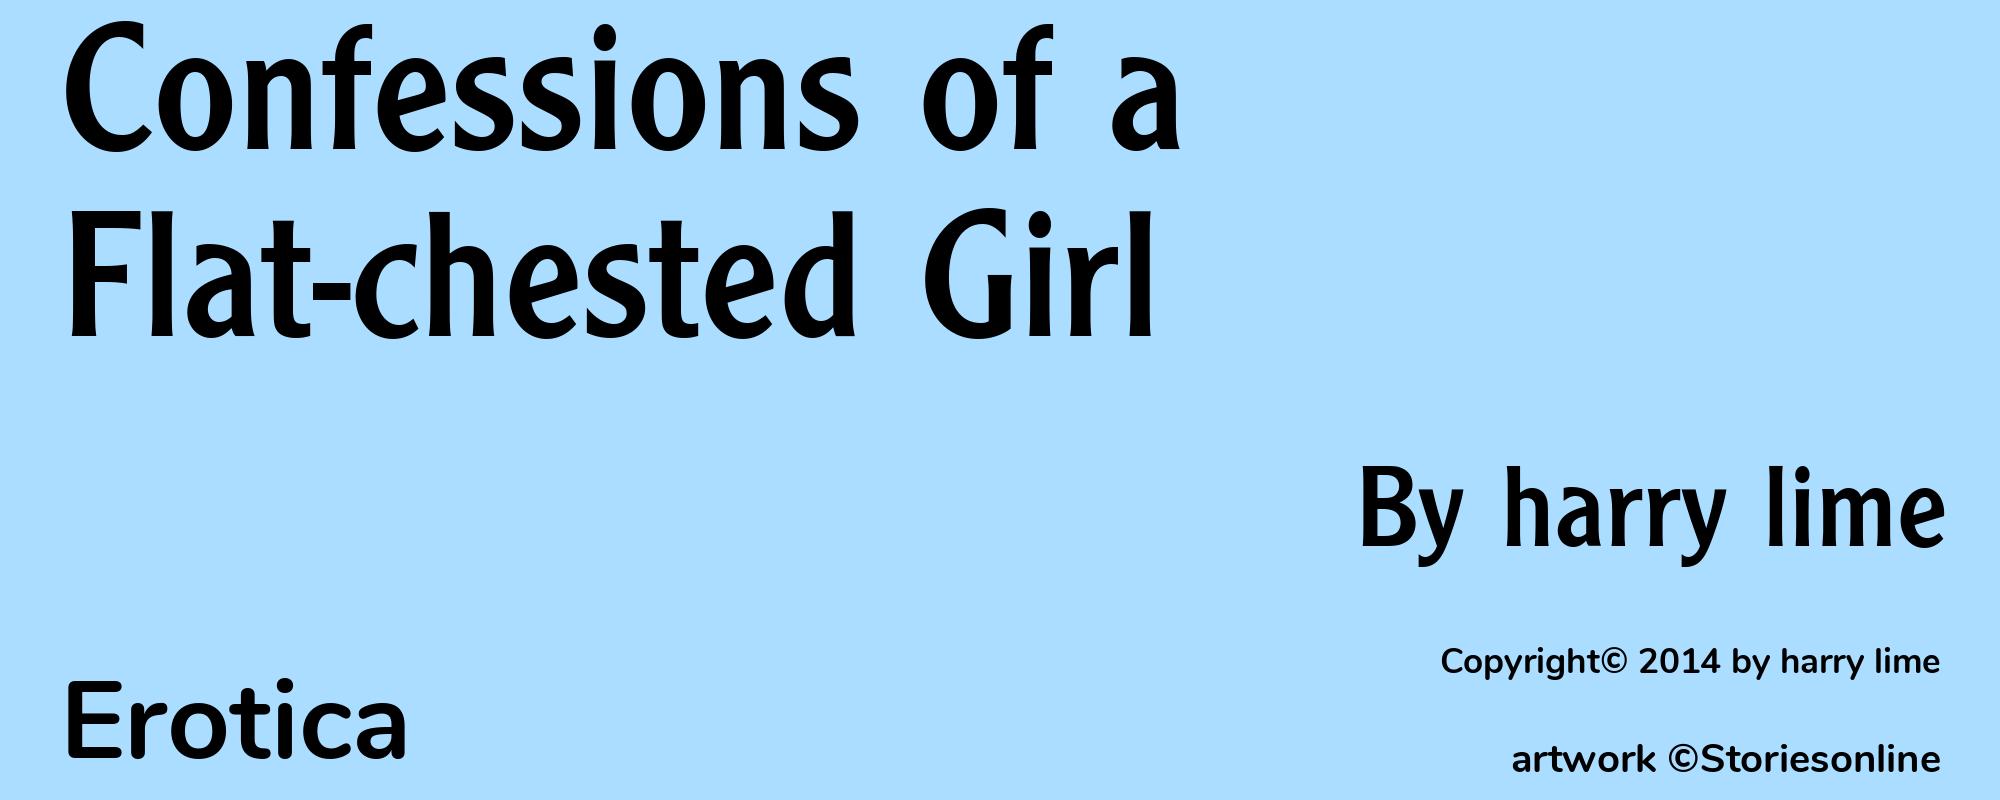 Confessions of a Flat-chested Girl - Cover